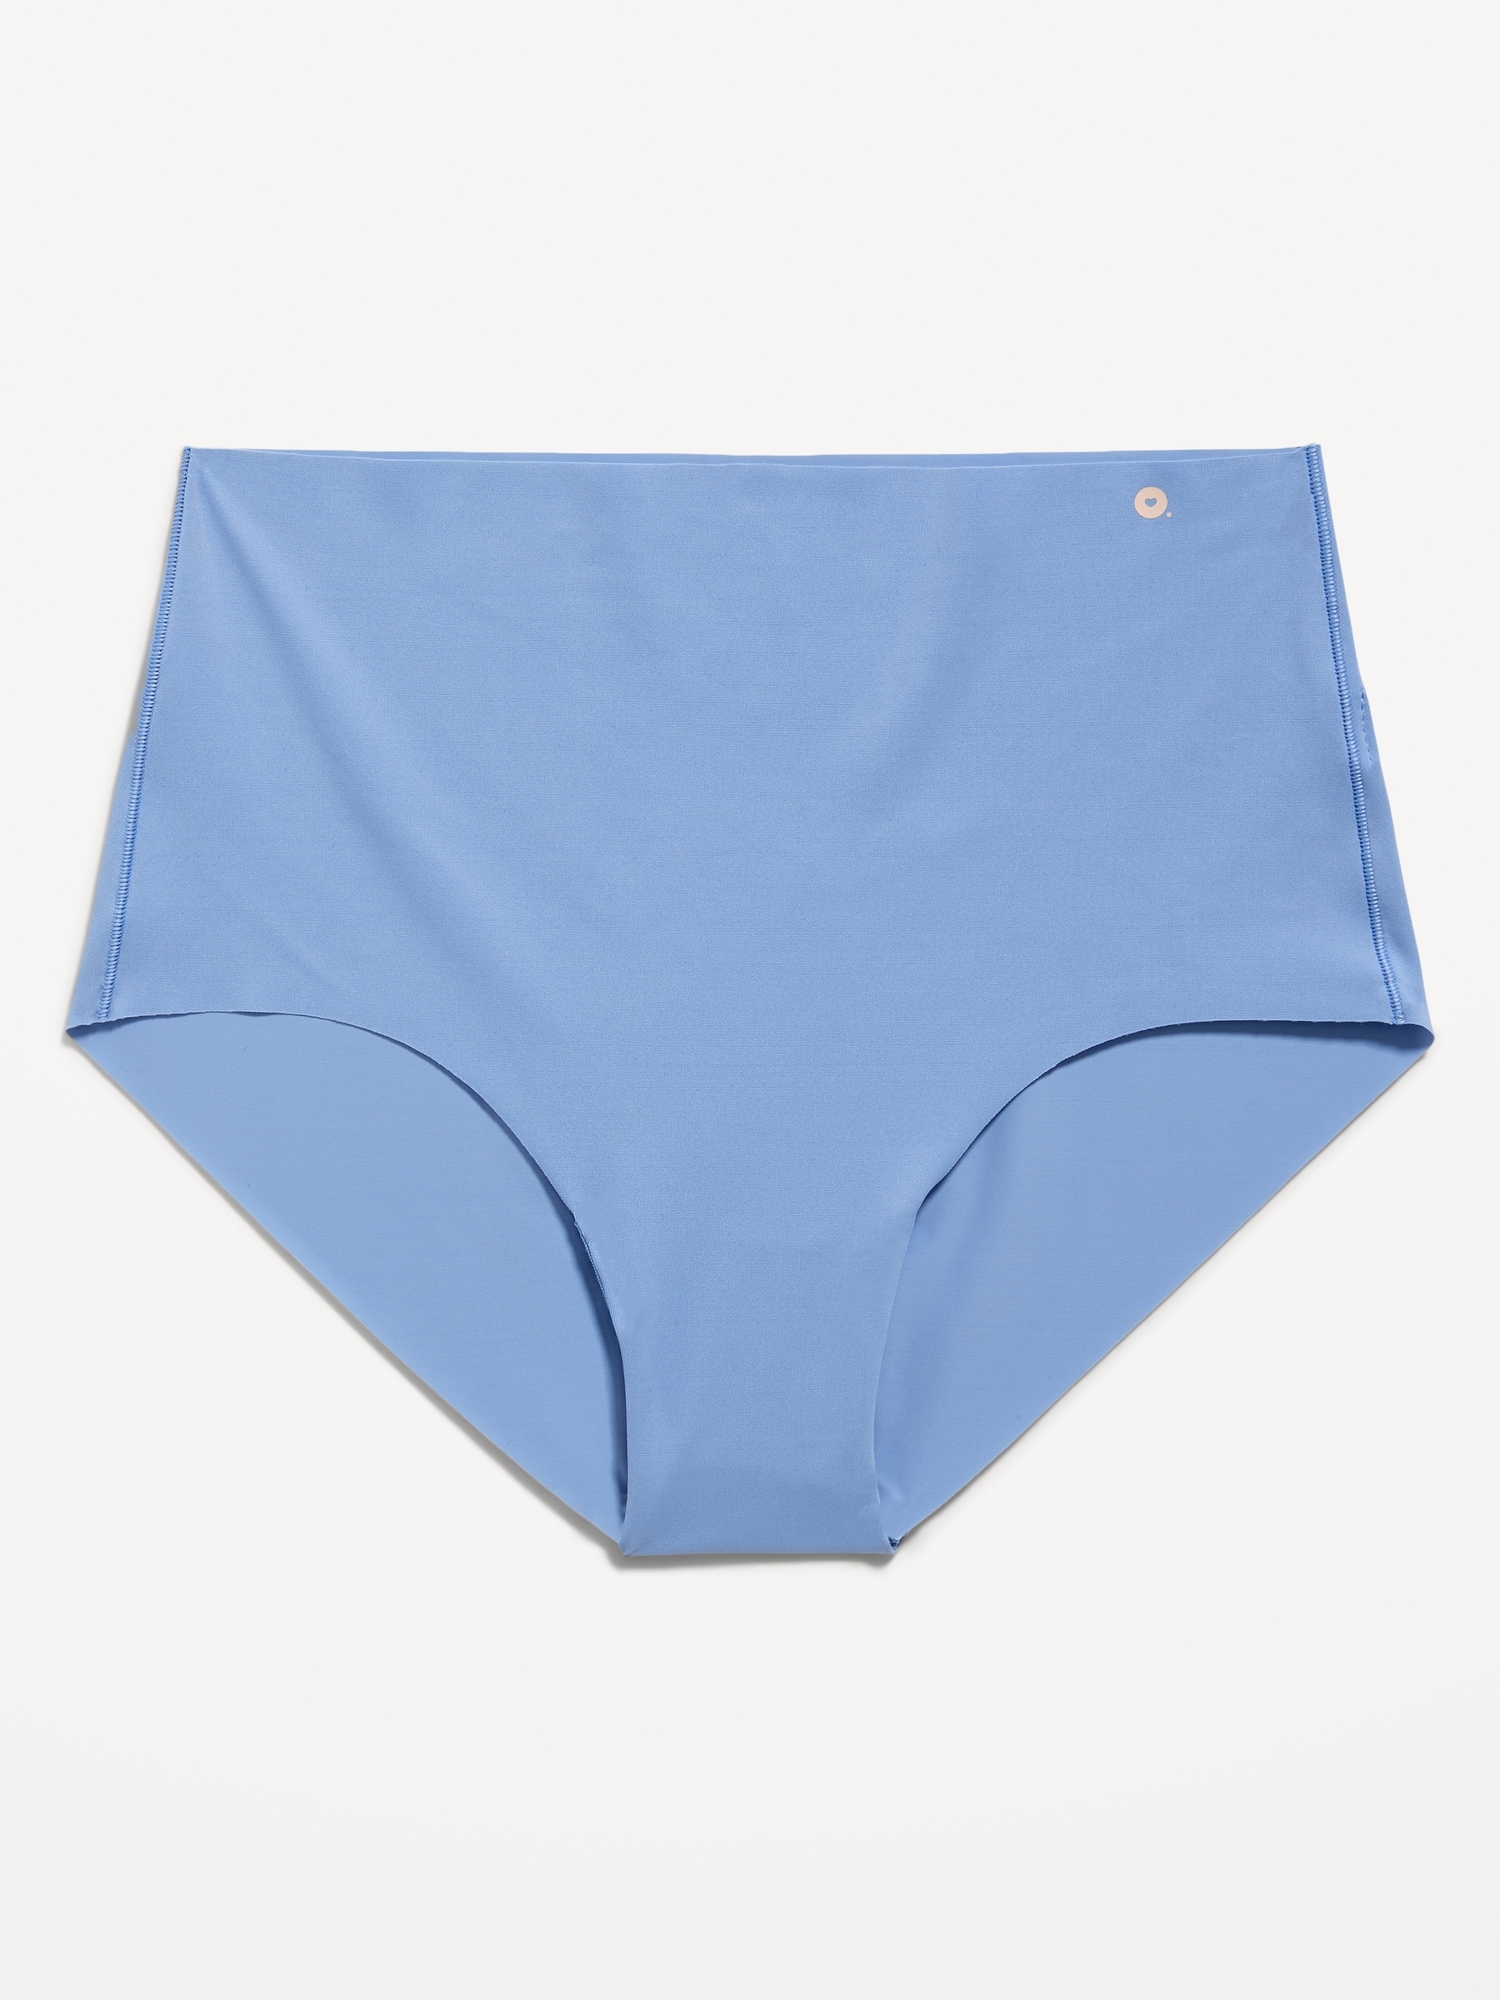 Seamless Underwear for sale in Jembatcumbene, New South Wales